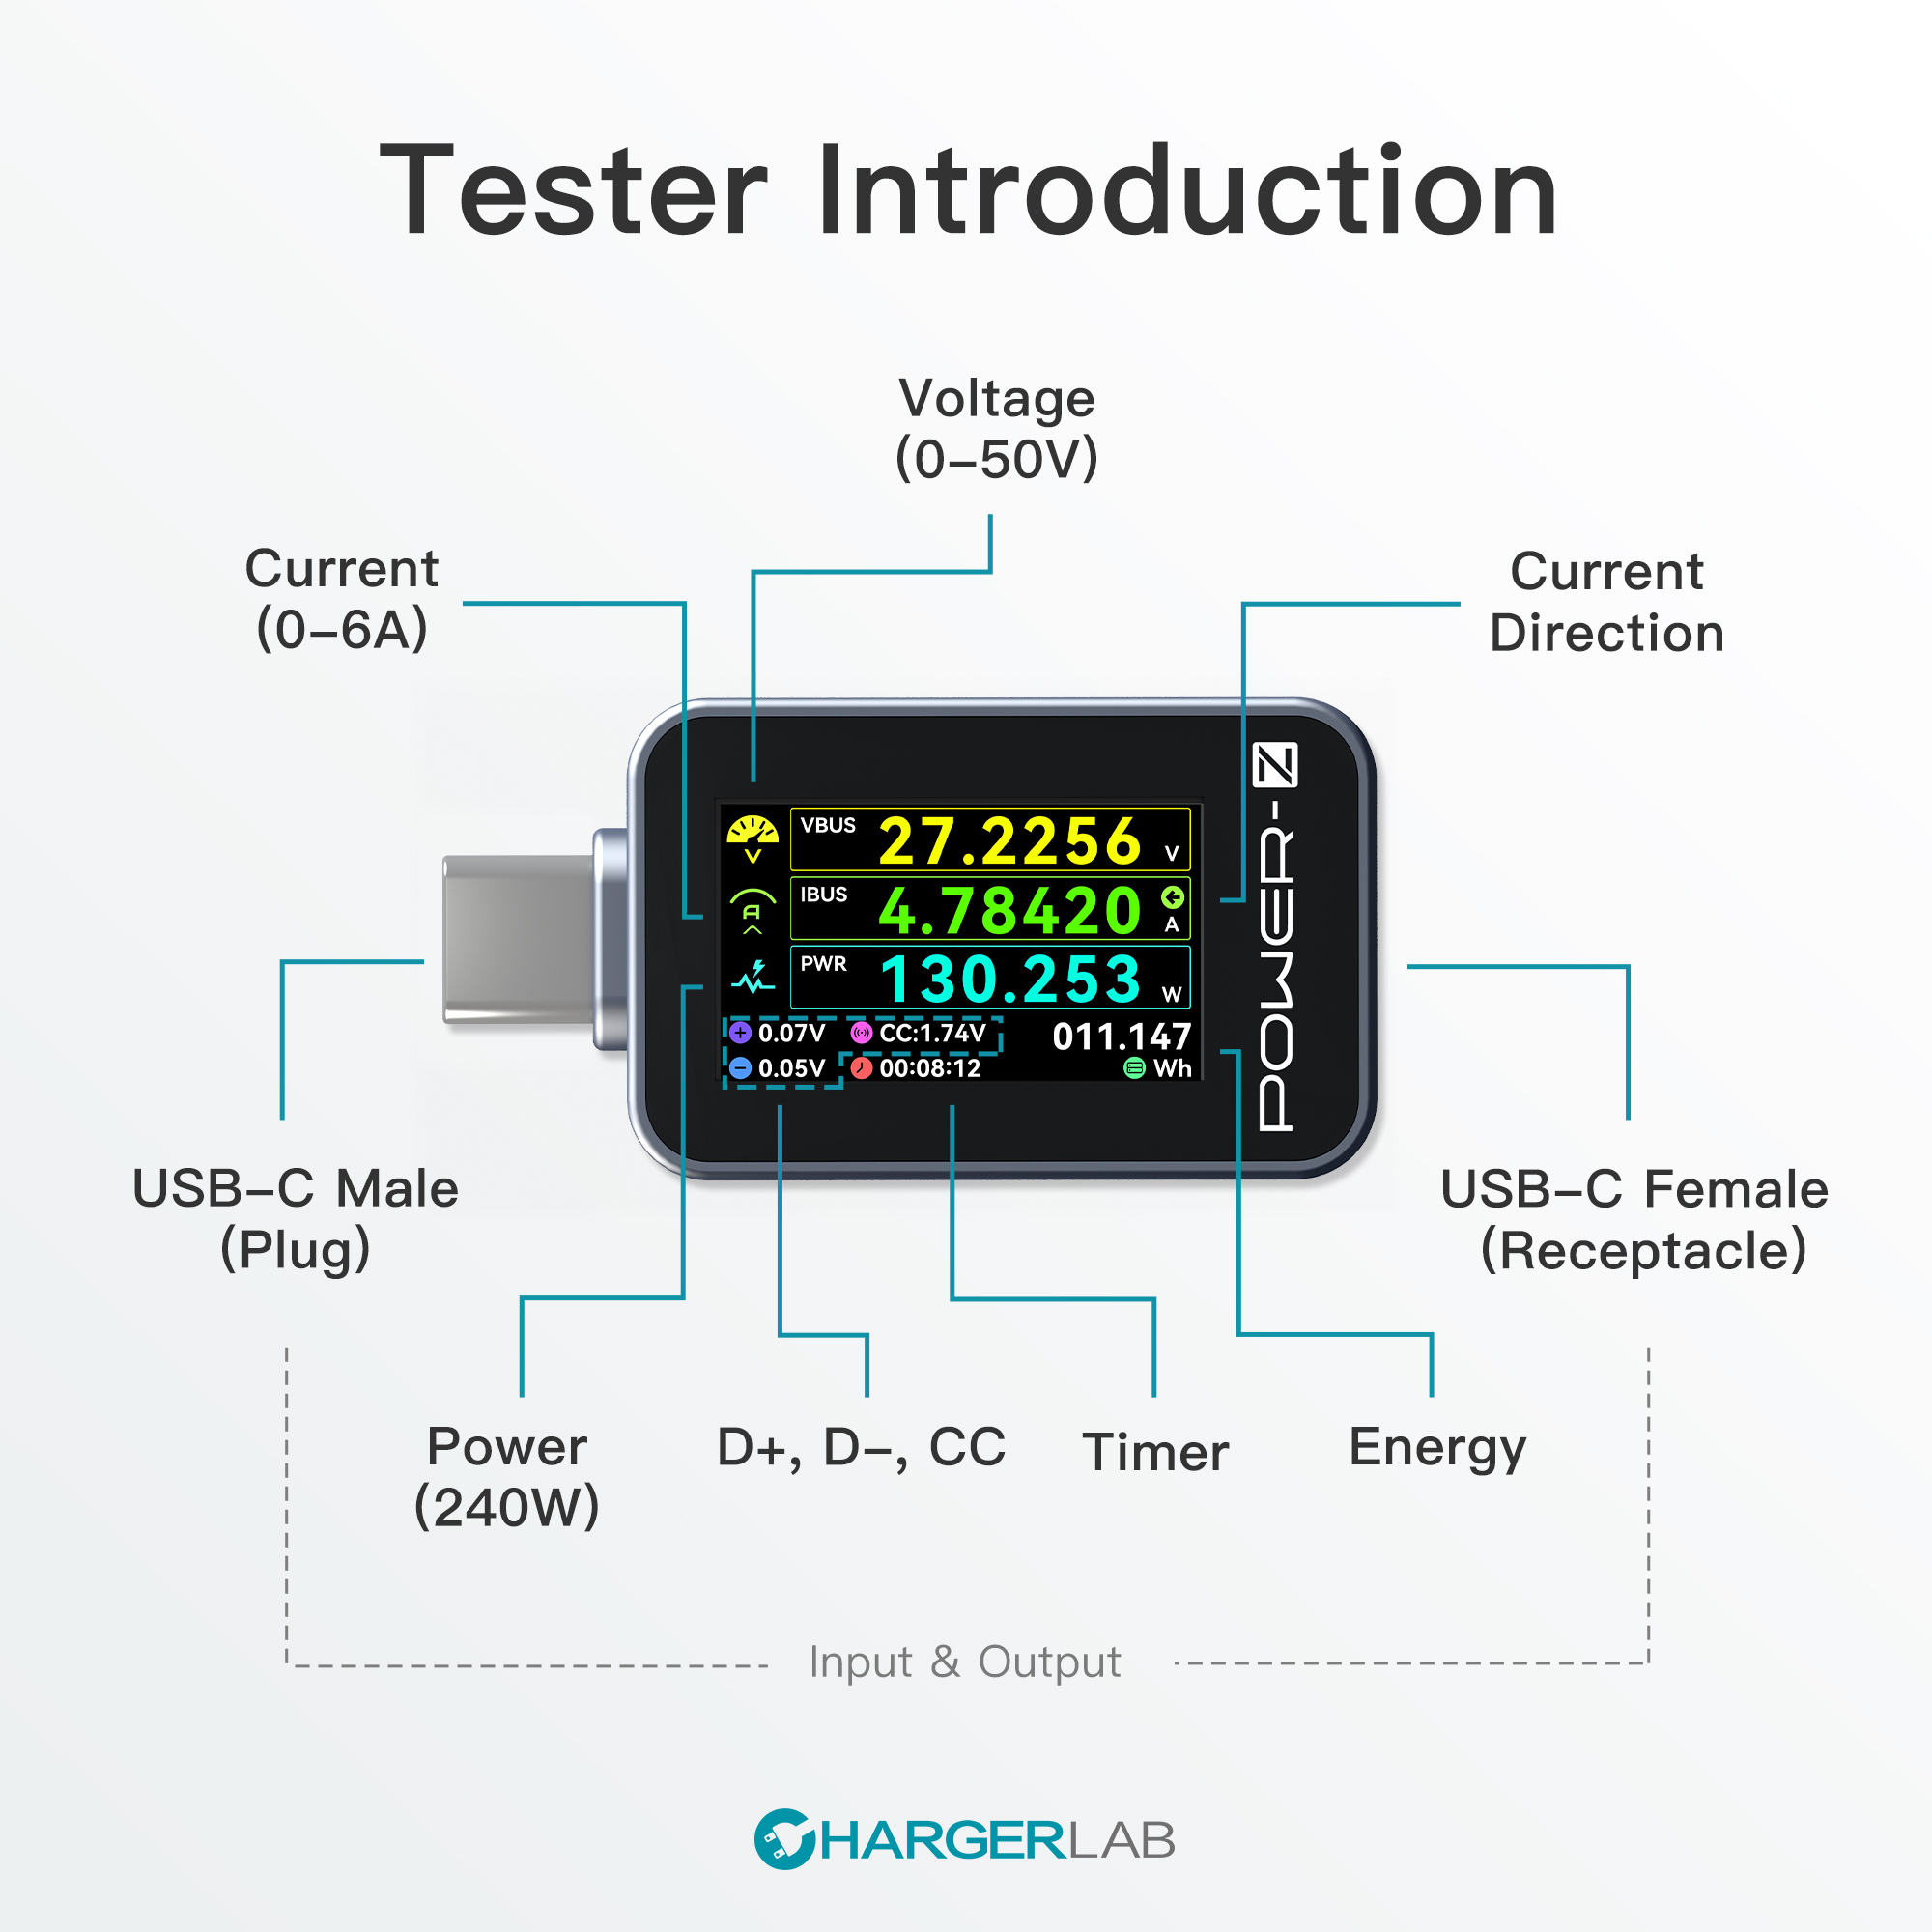 Metal Shell | Introducing the Brand New POWER-Z C240-Chargerlab